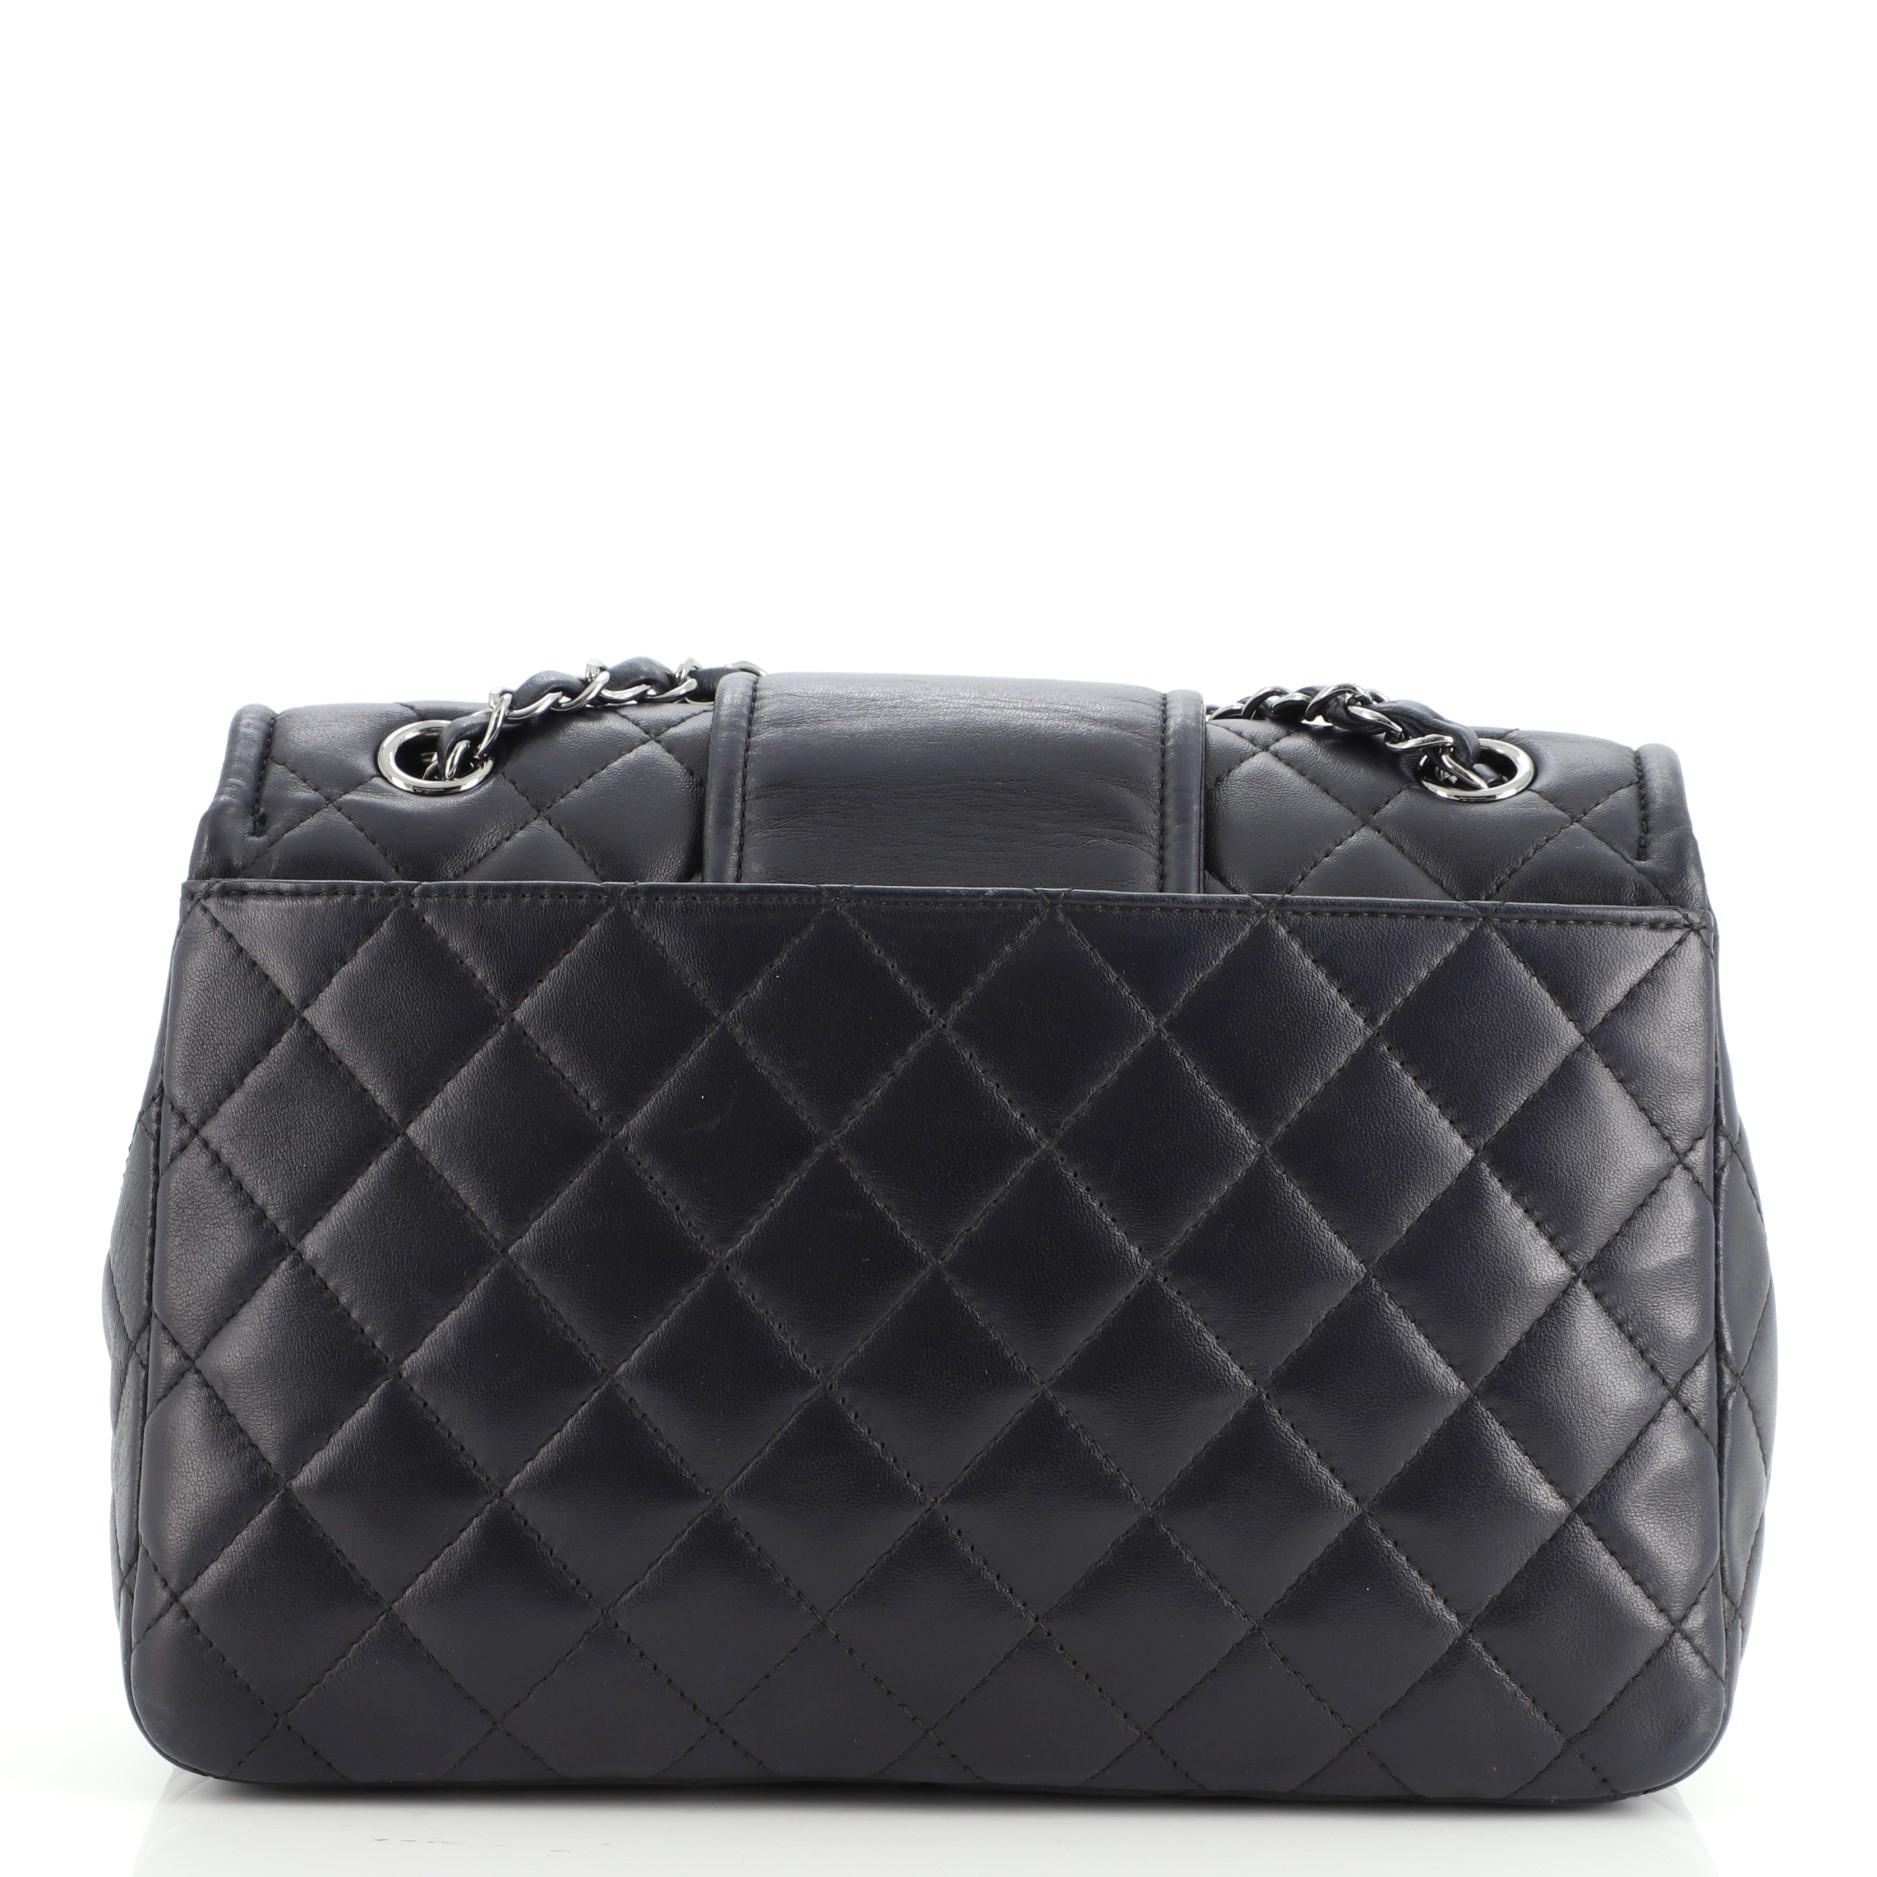 Black Chanel Elementary Chic Flap Bag Quilted Lambskin Medium